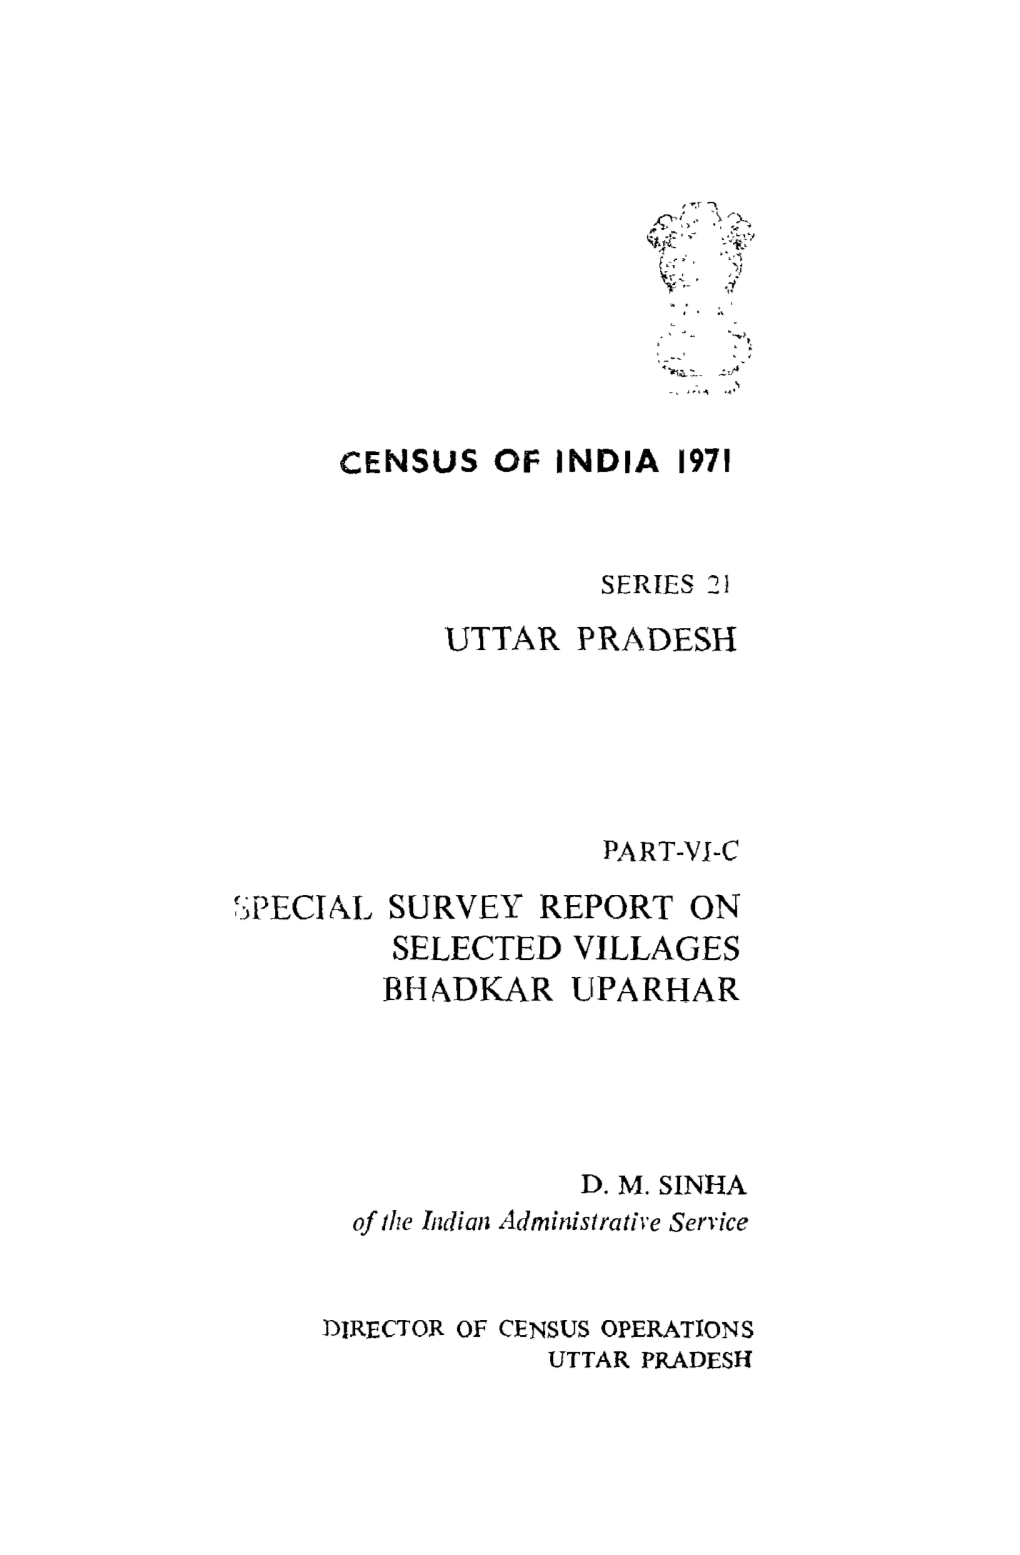 Special Survey Report on Selected Villages Bhadkar Uparhar, Part VI